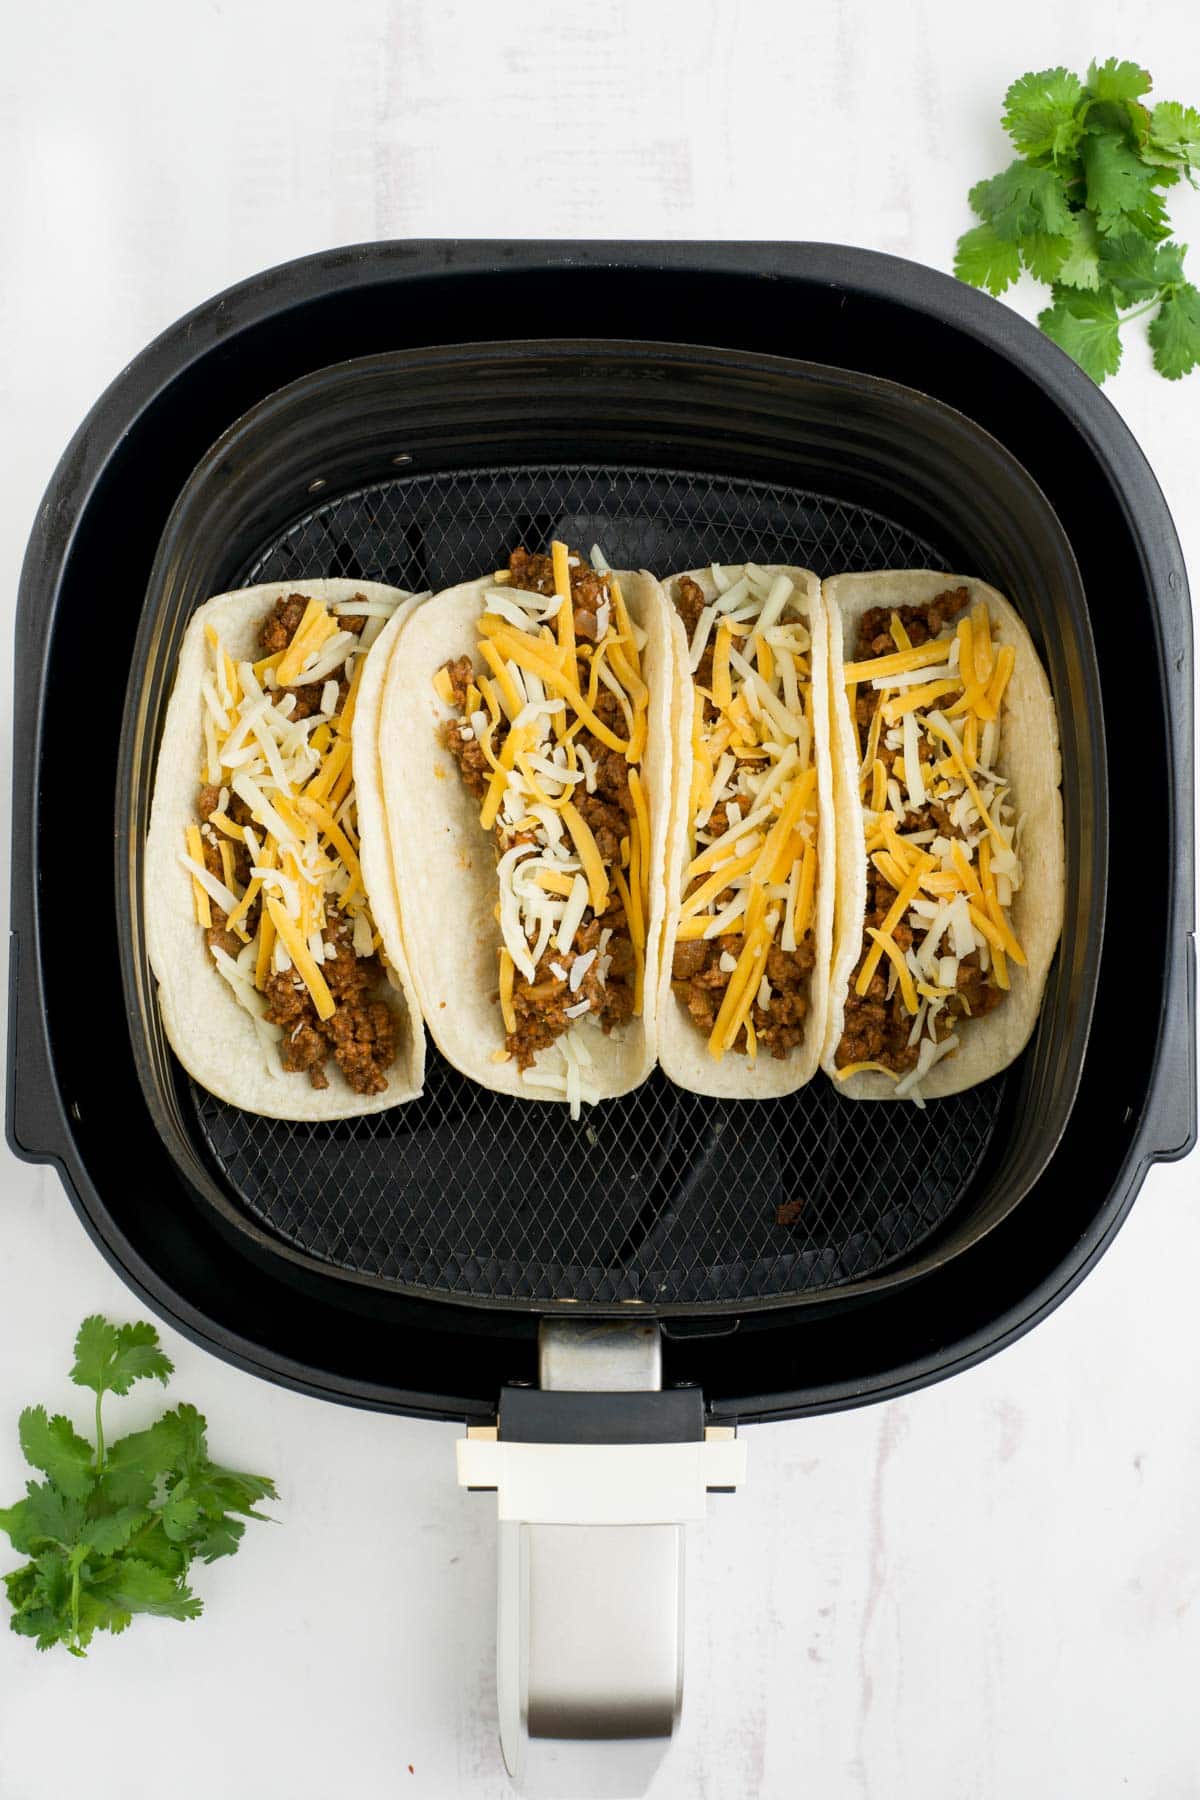 Corn tortillas with ground beef and cheese in an air fryer.